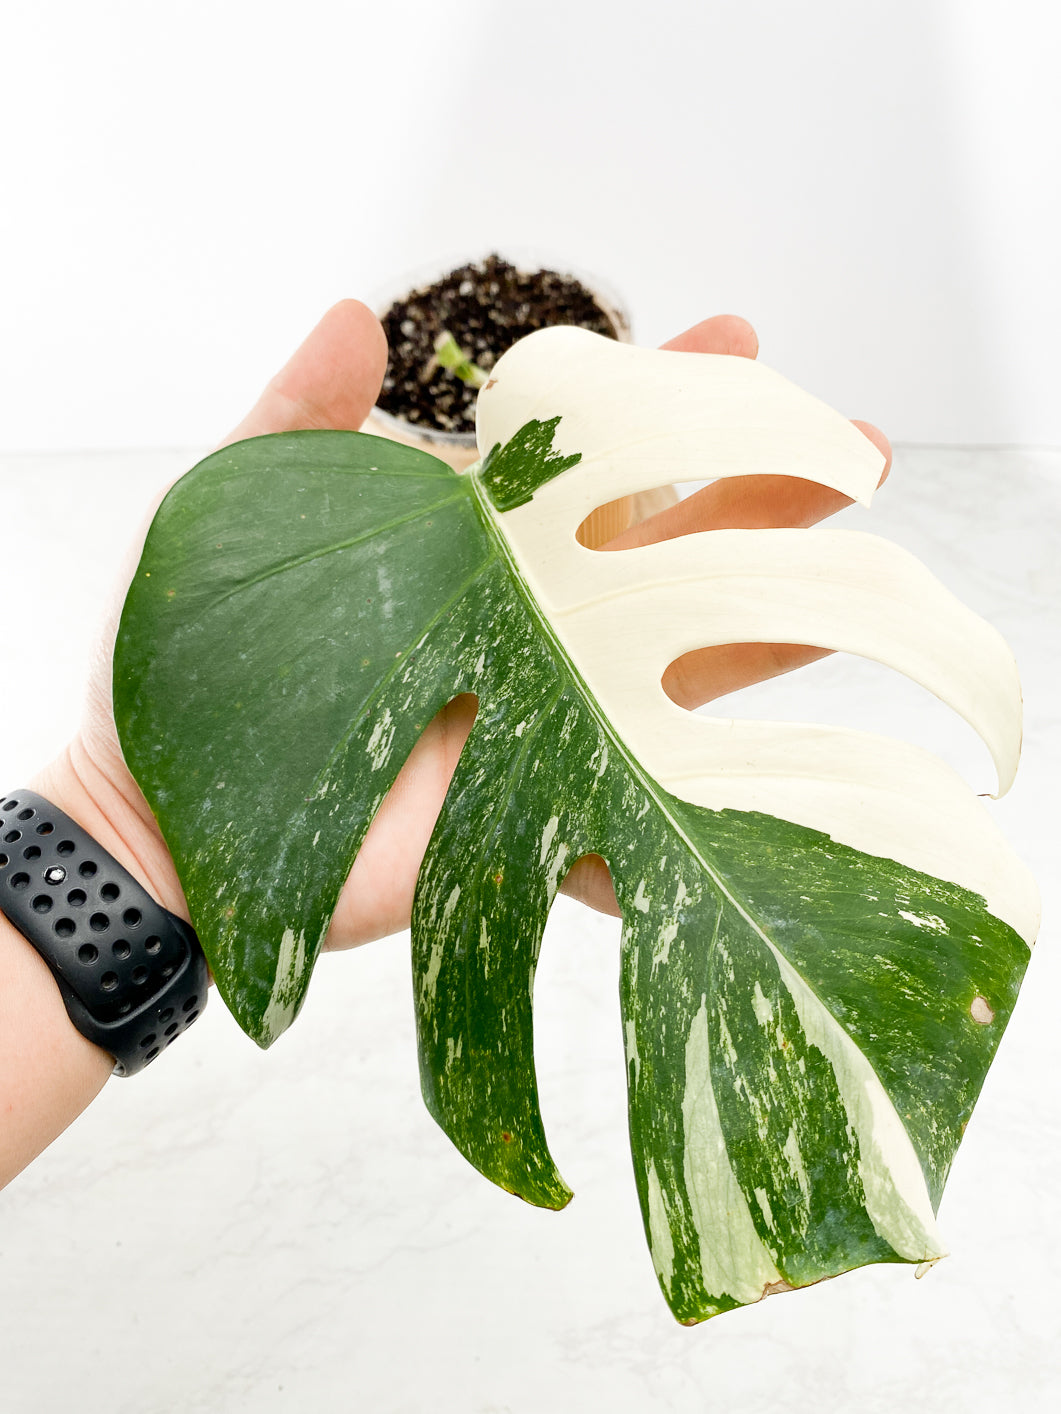 Monstera albo variegata White Tiger Slightly Rooted 1 leaf double nodes Slightly Rooted Top Cutting